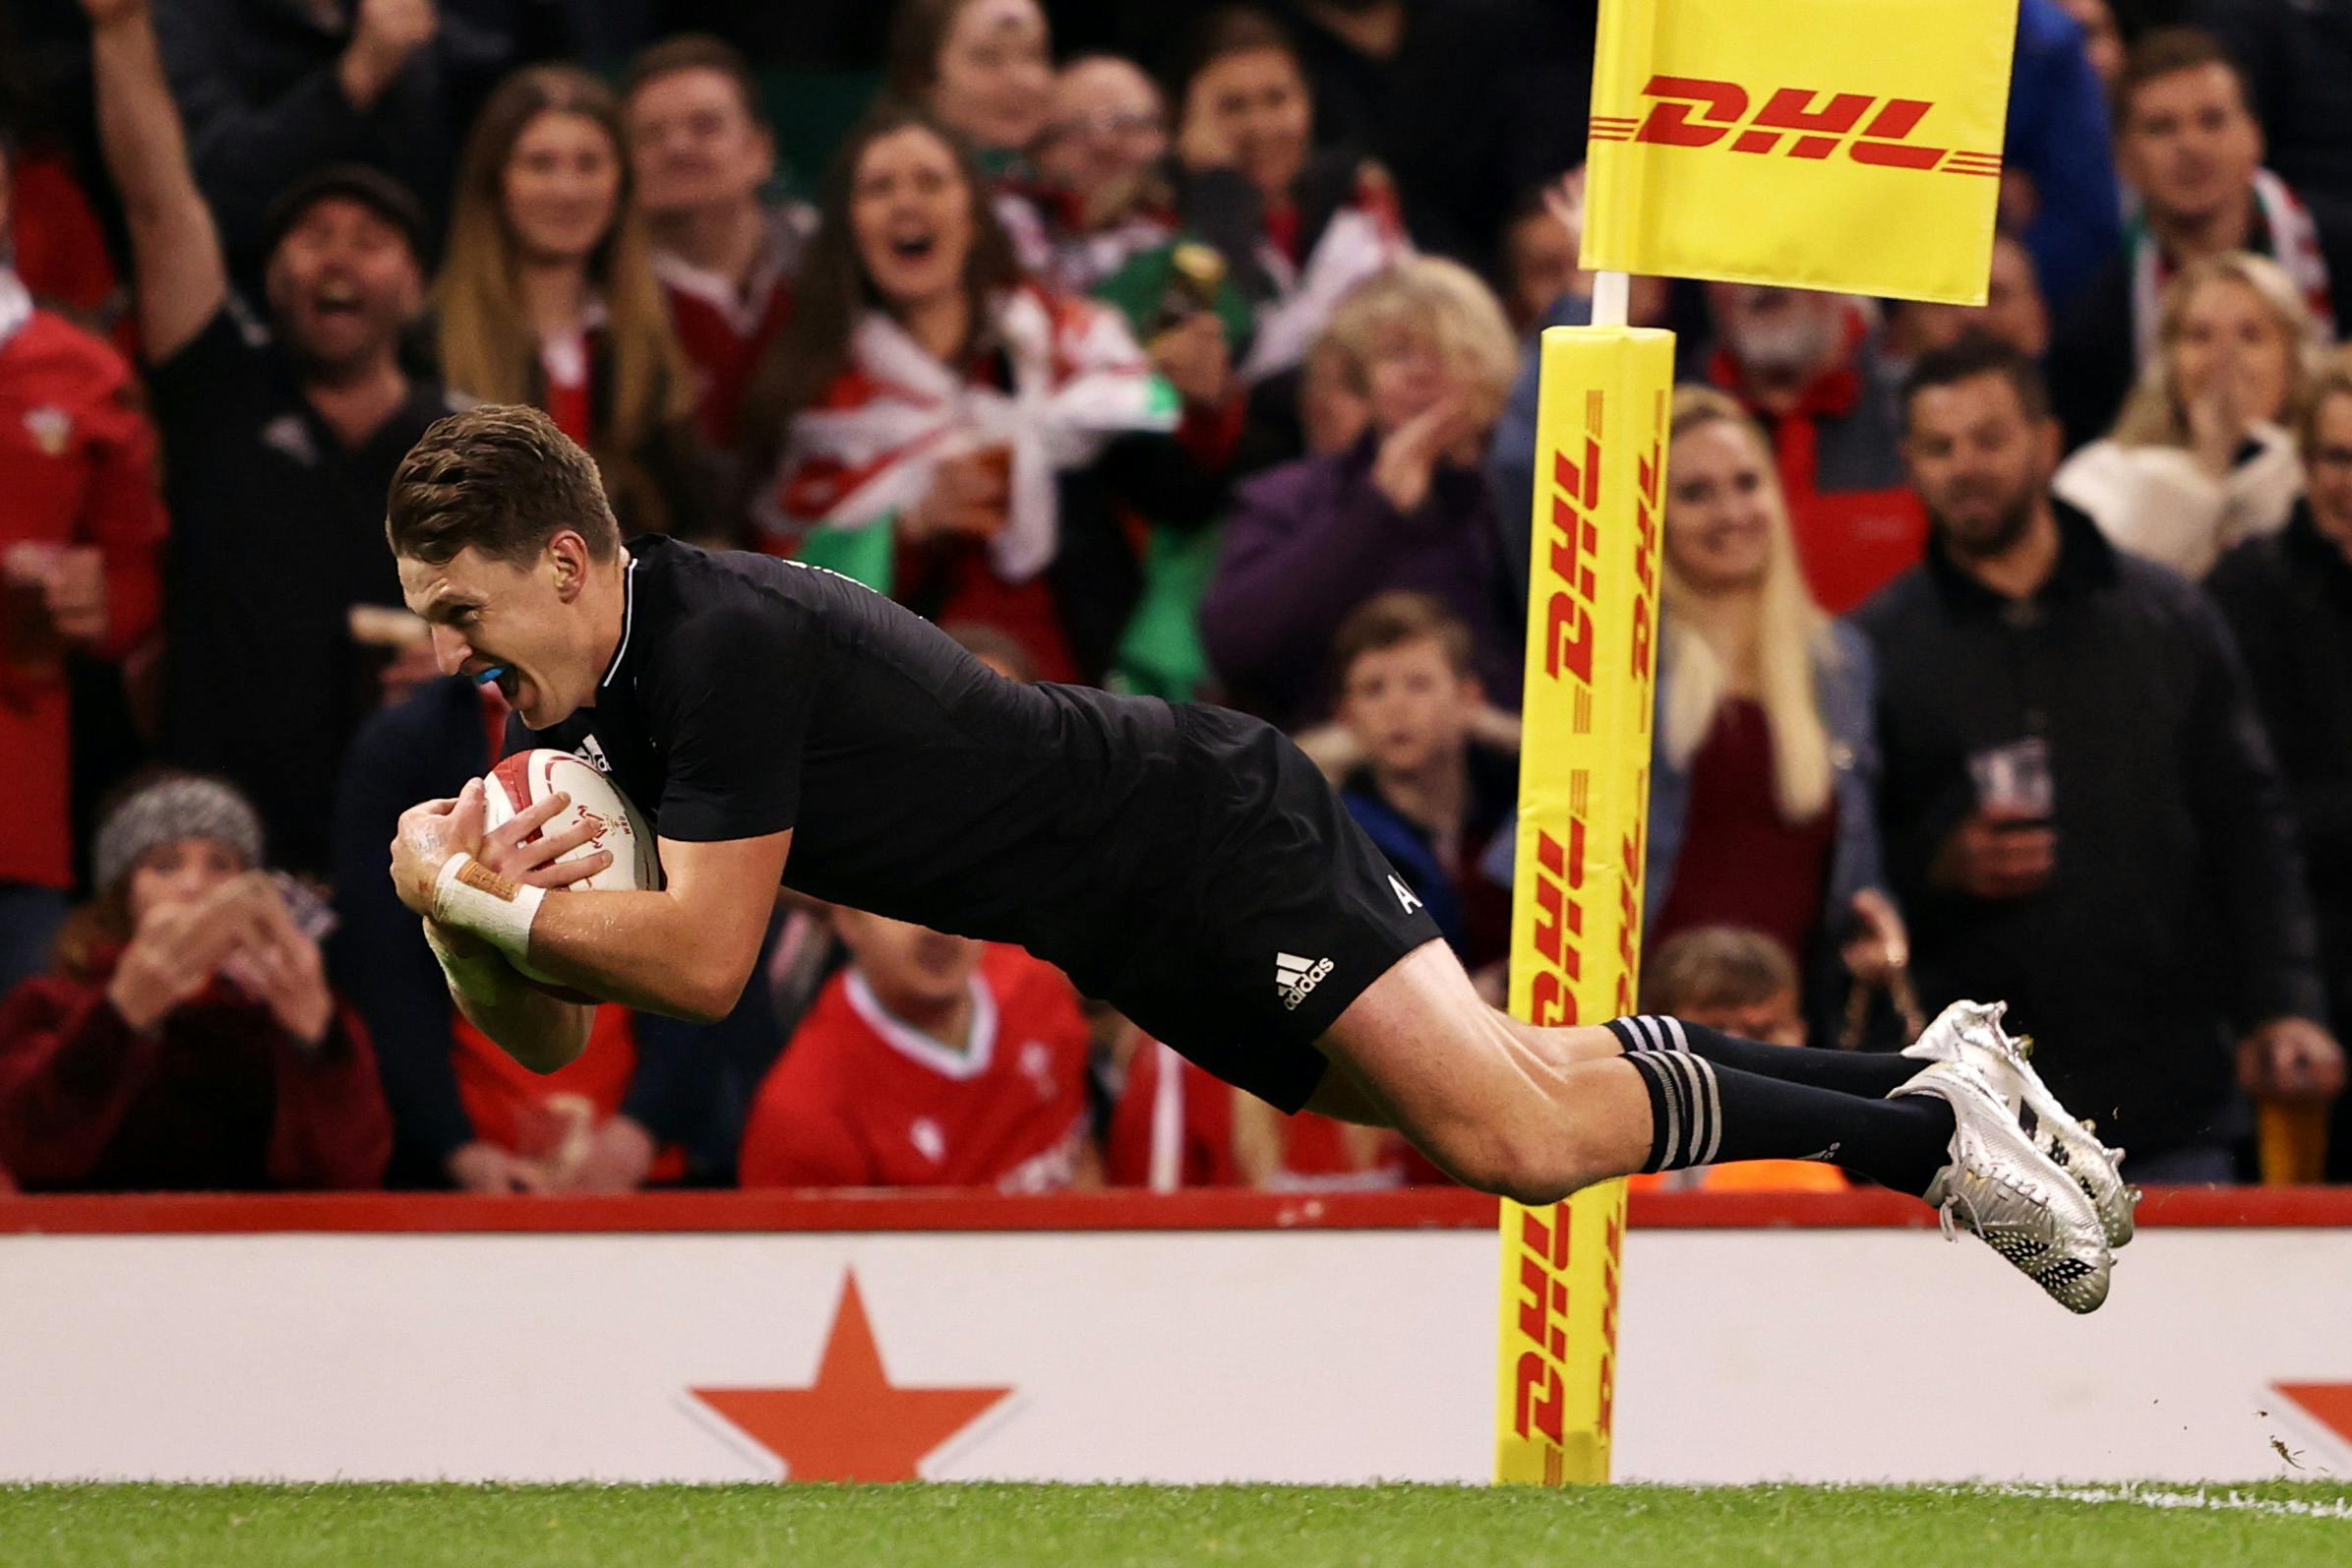 Beauden Barrett has scored on his 100th Test appearance as New Zealand beat Wales 54-16 | Getty Images